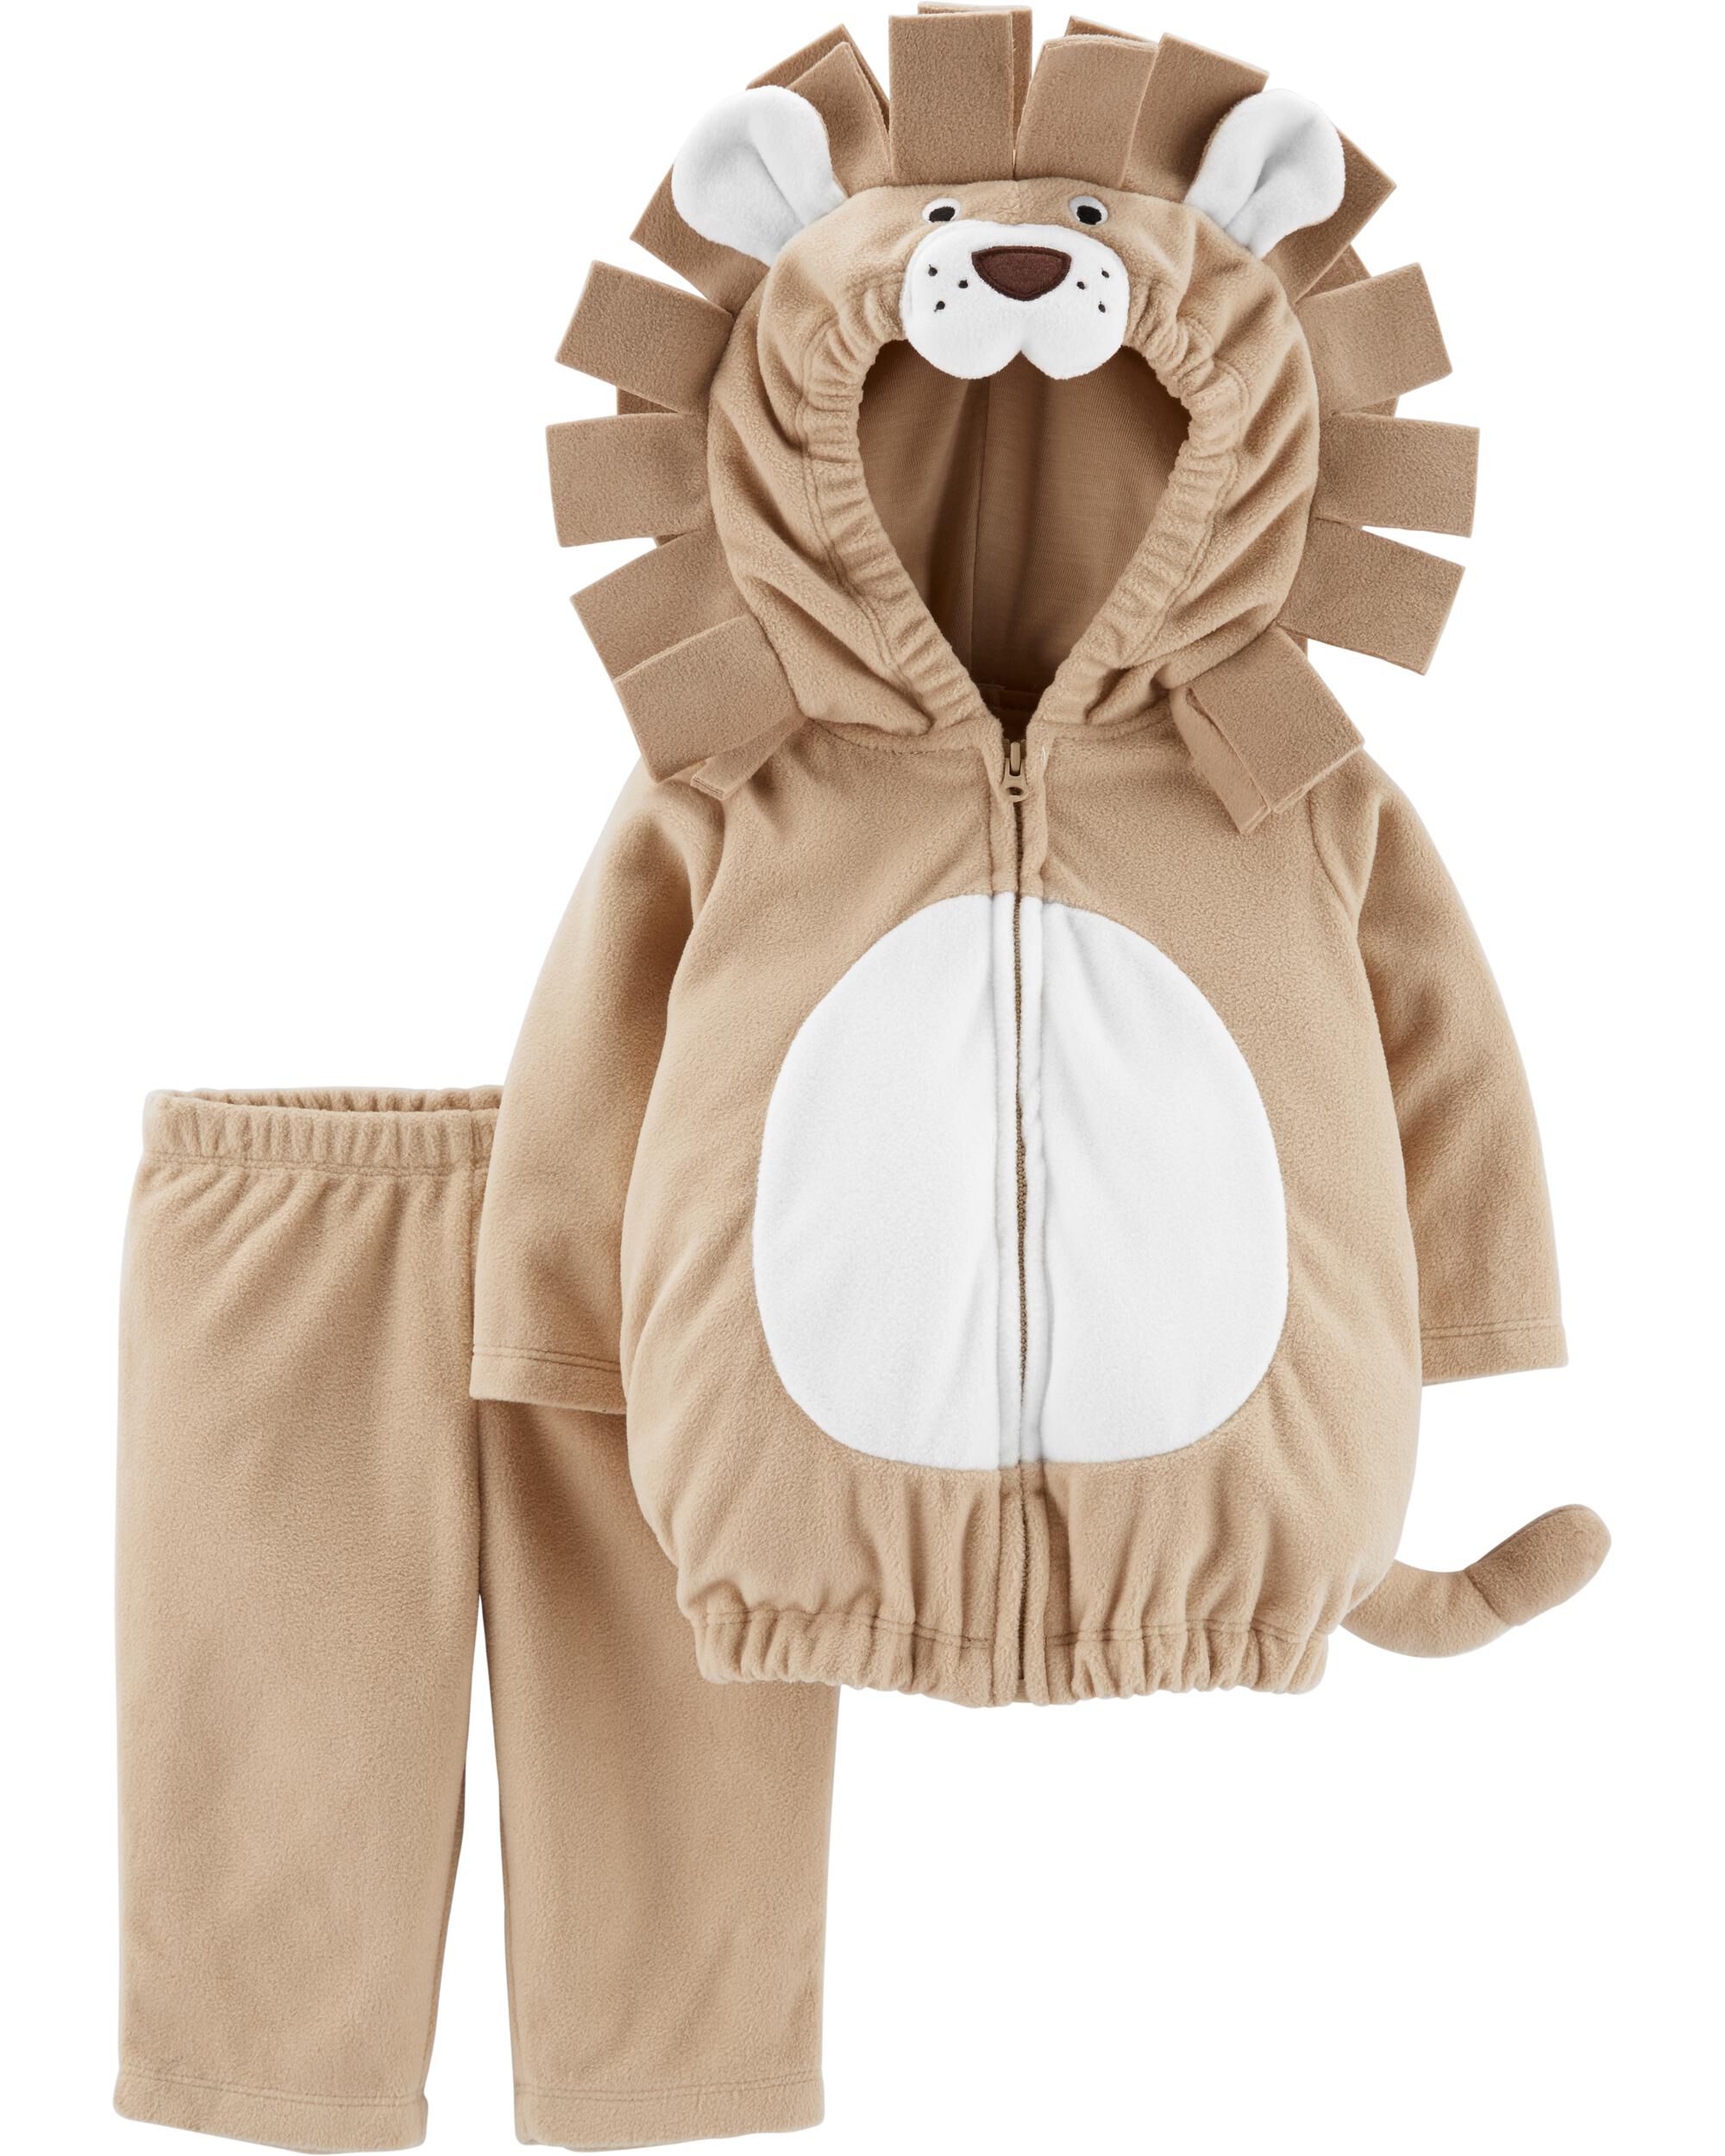 carters baby lion costume